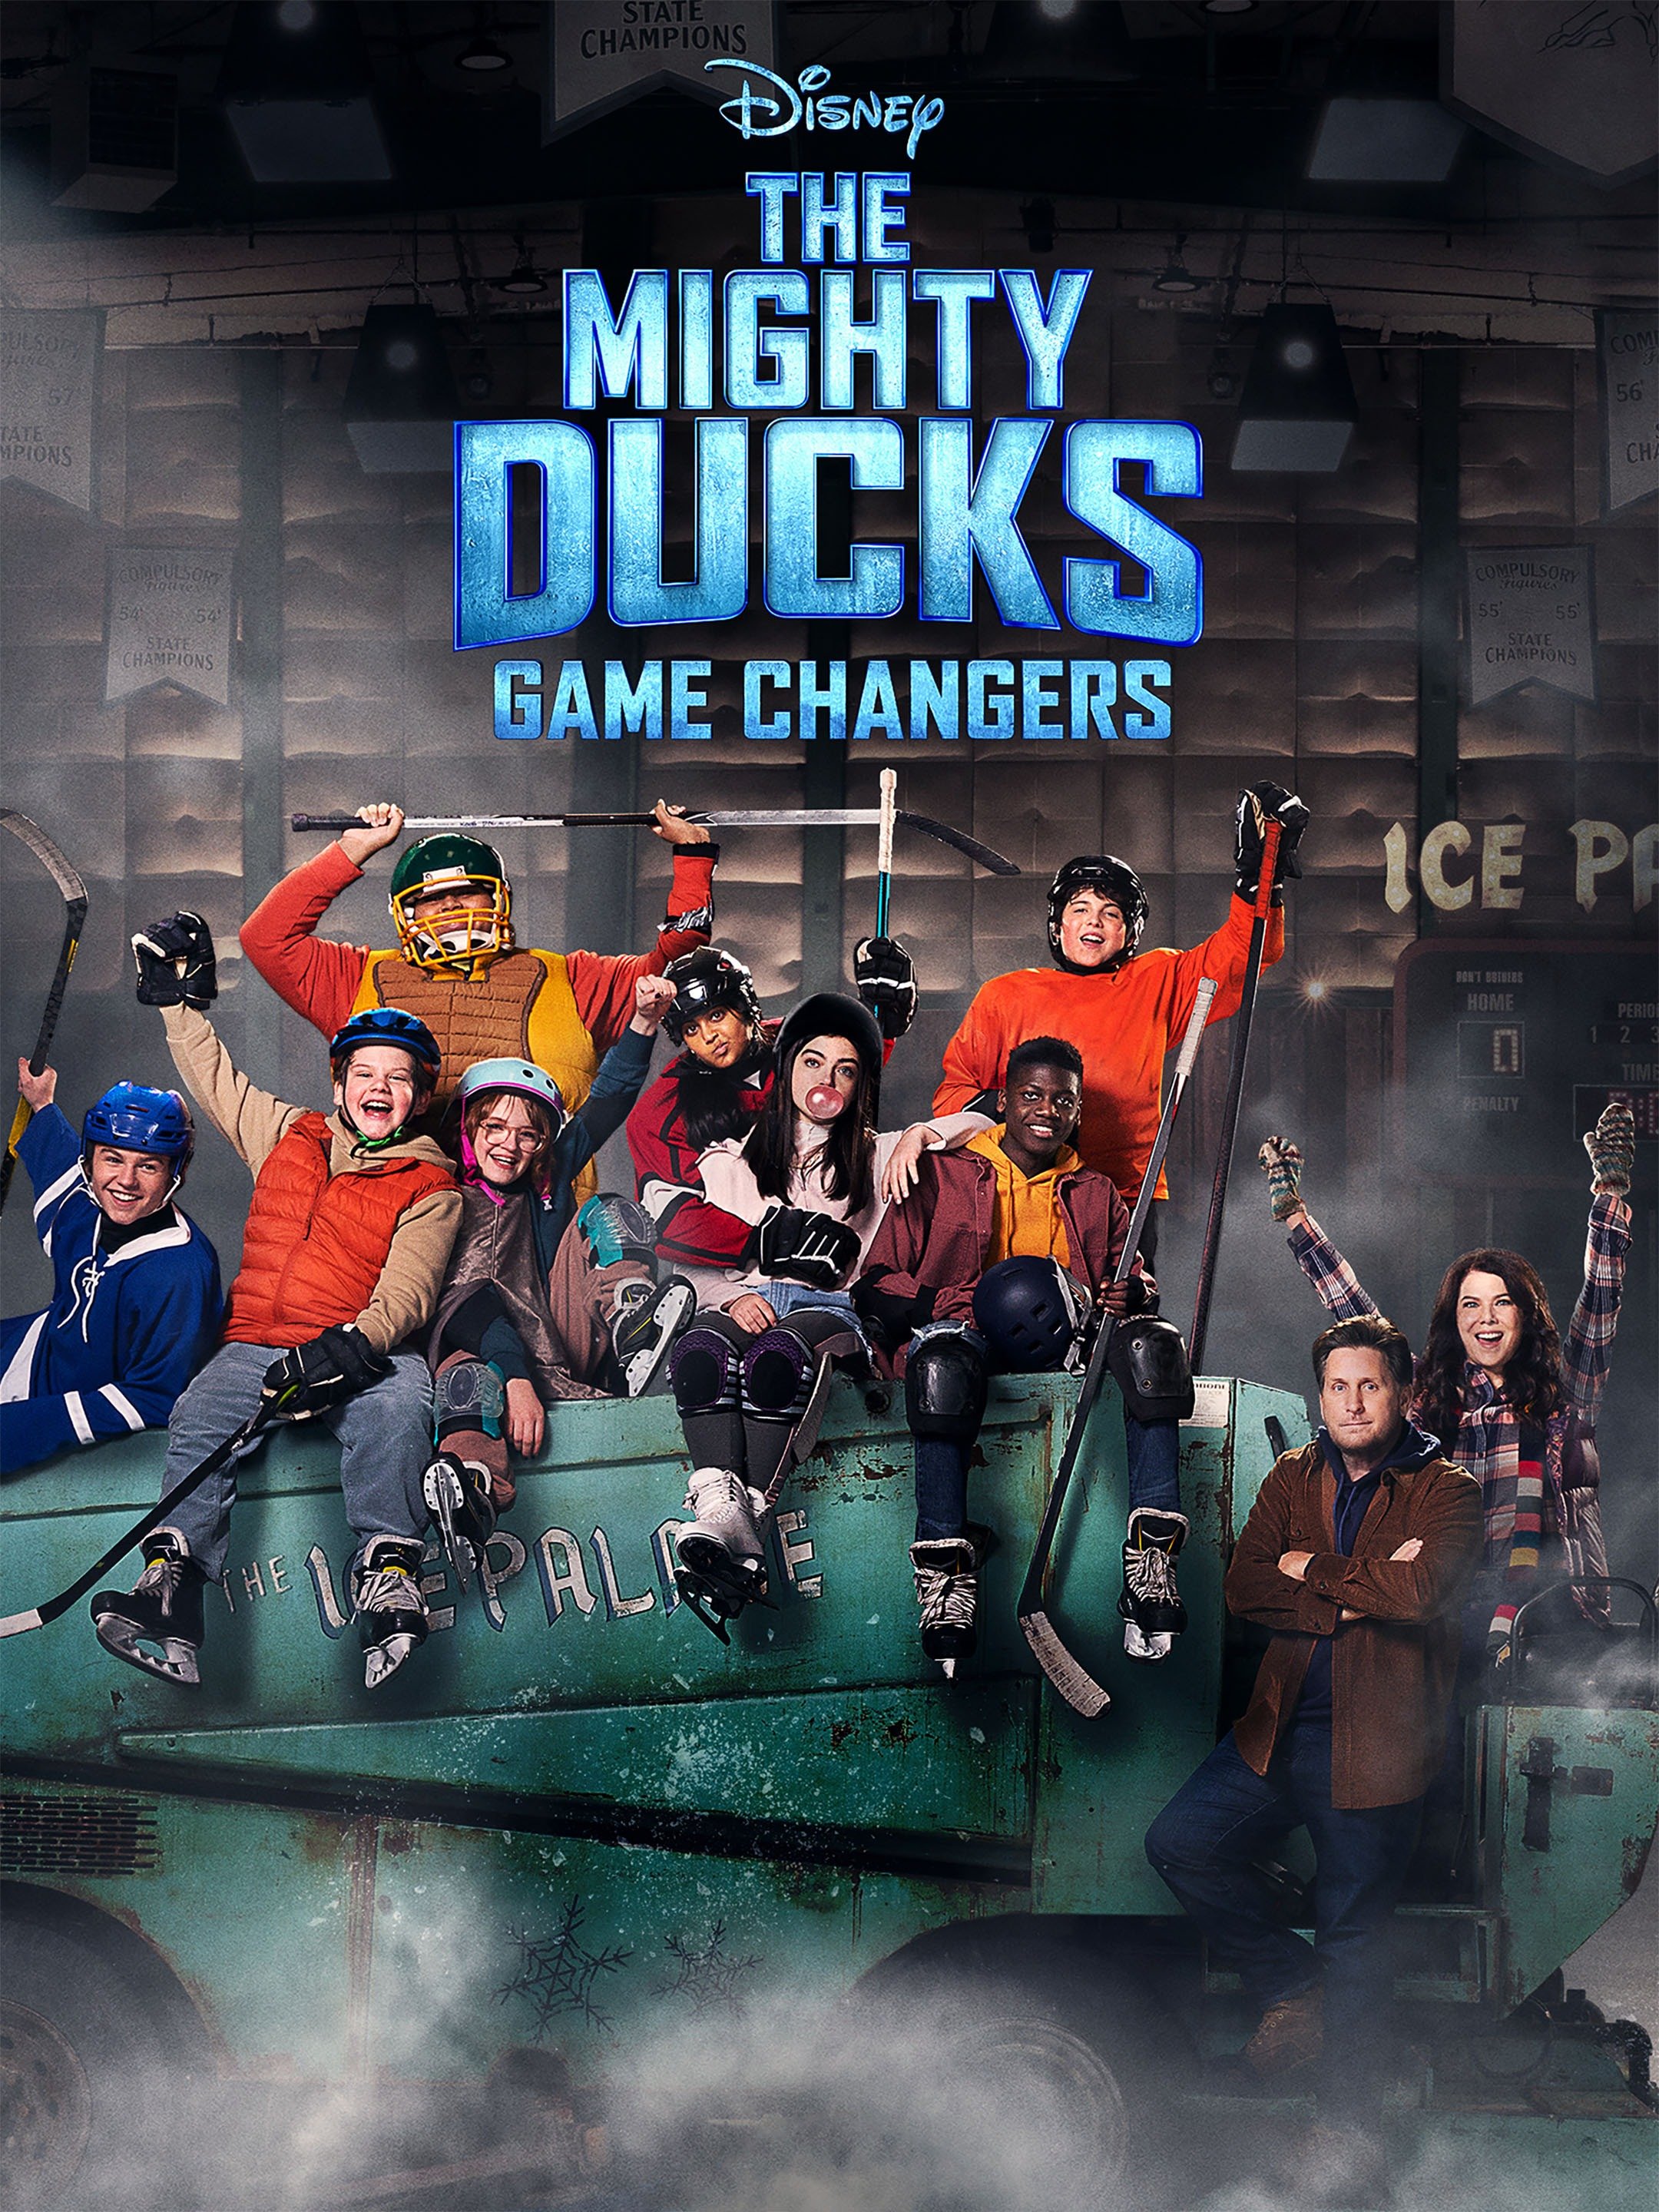 The Mighty Ducks? More Like The Mighty Dicks